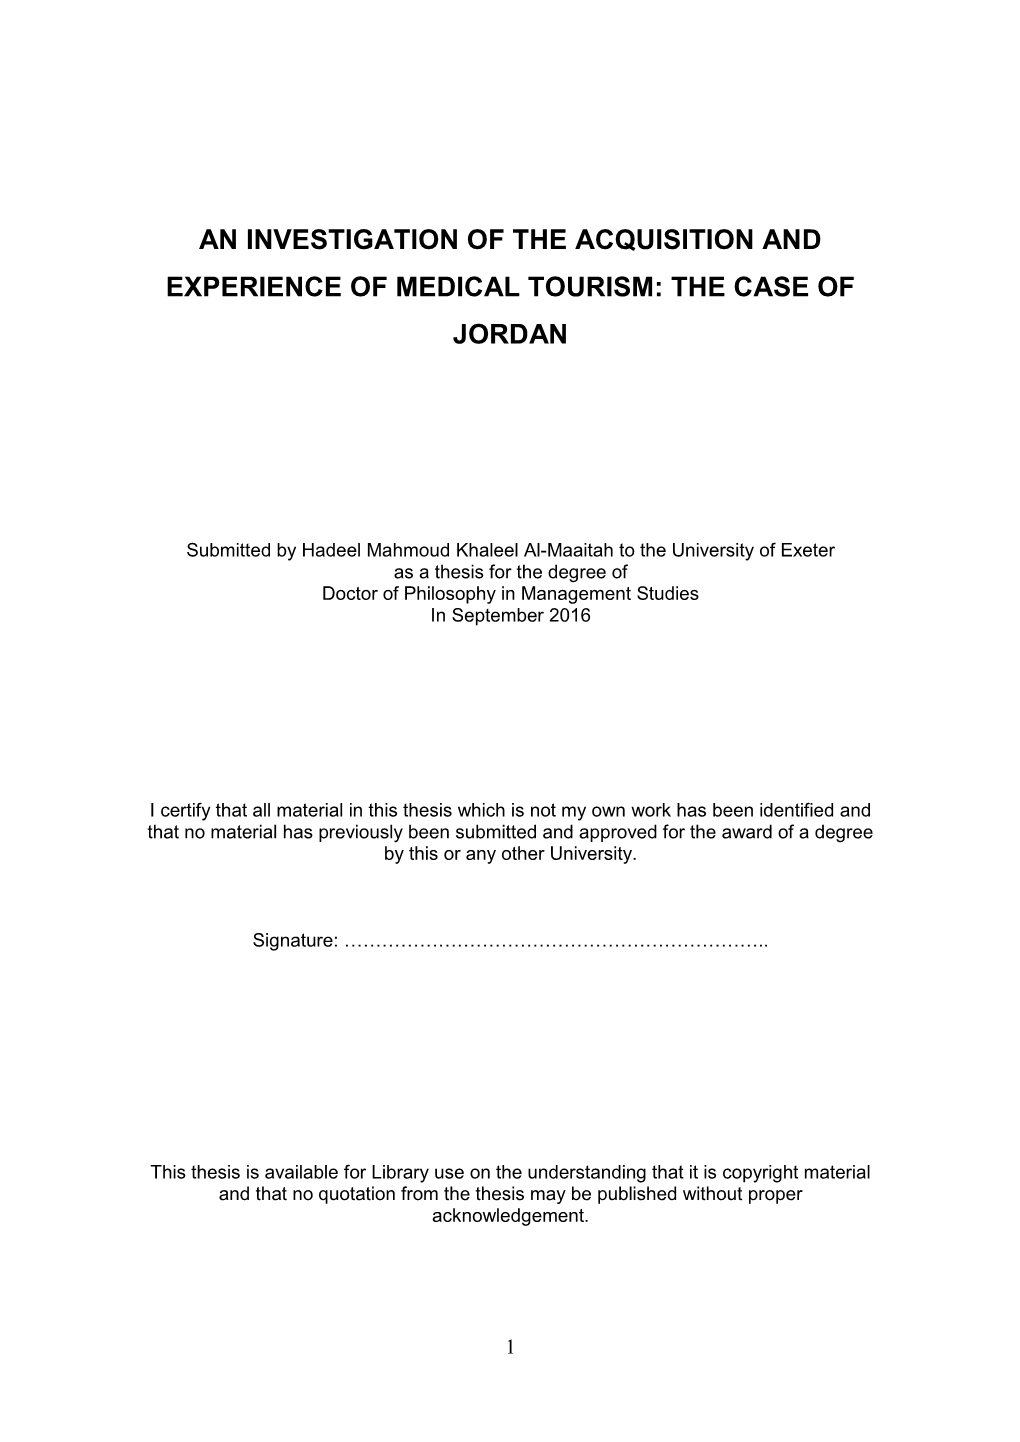 An Investigation of the Acquisition and Experience of Medical Tourism: the Case of Jordan